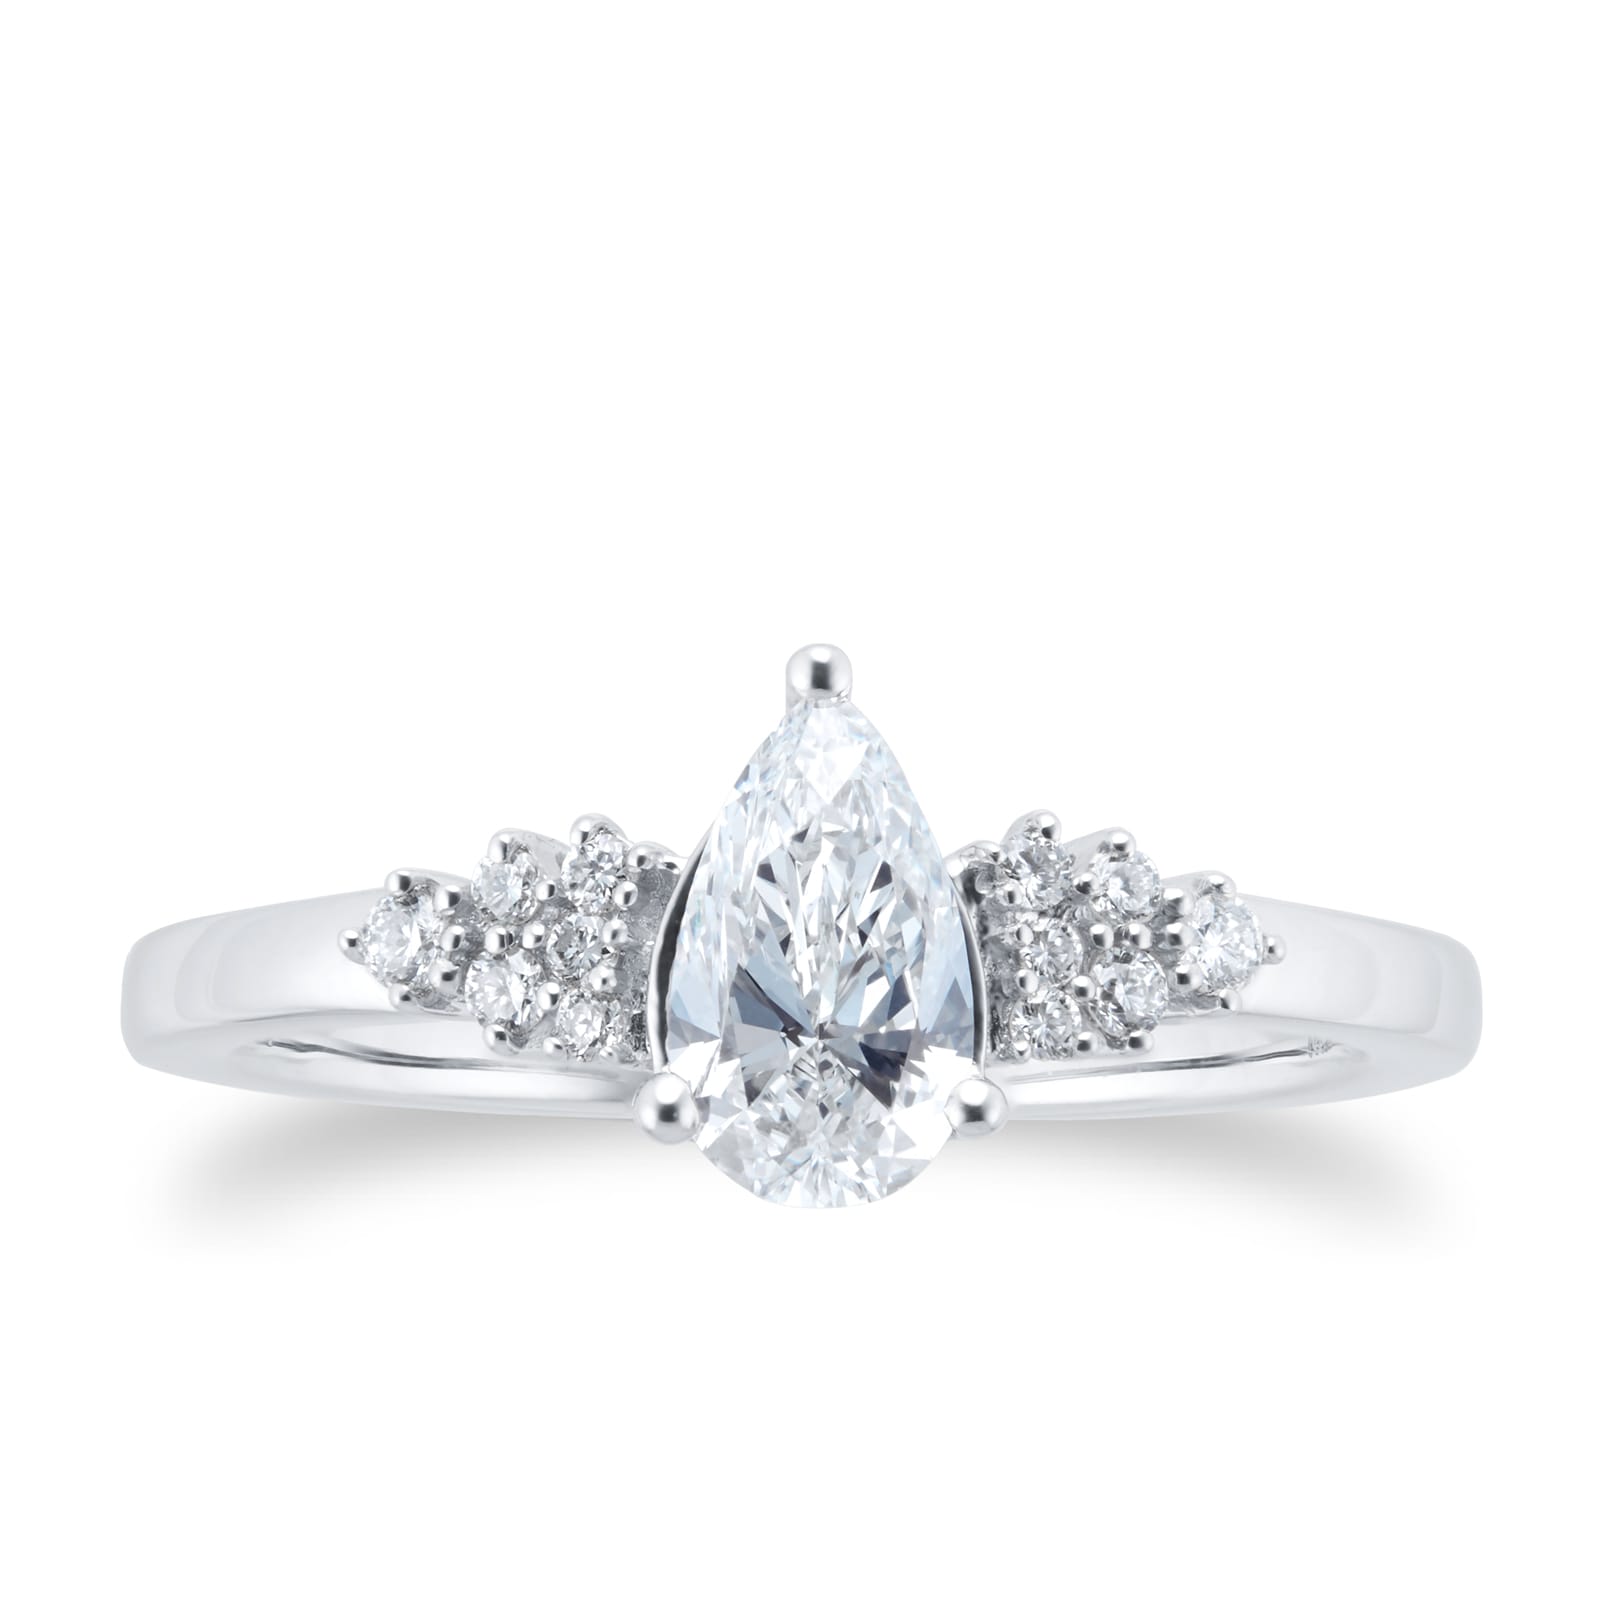 Platinum 0.70cttw Diamond Pear Scatter Engagement Ring - Ring Size N